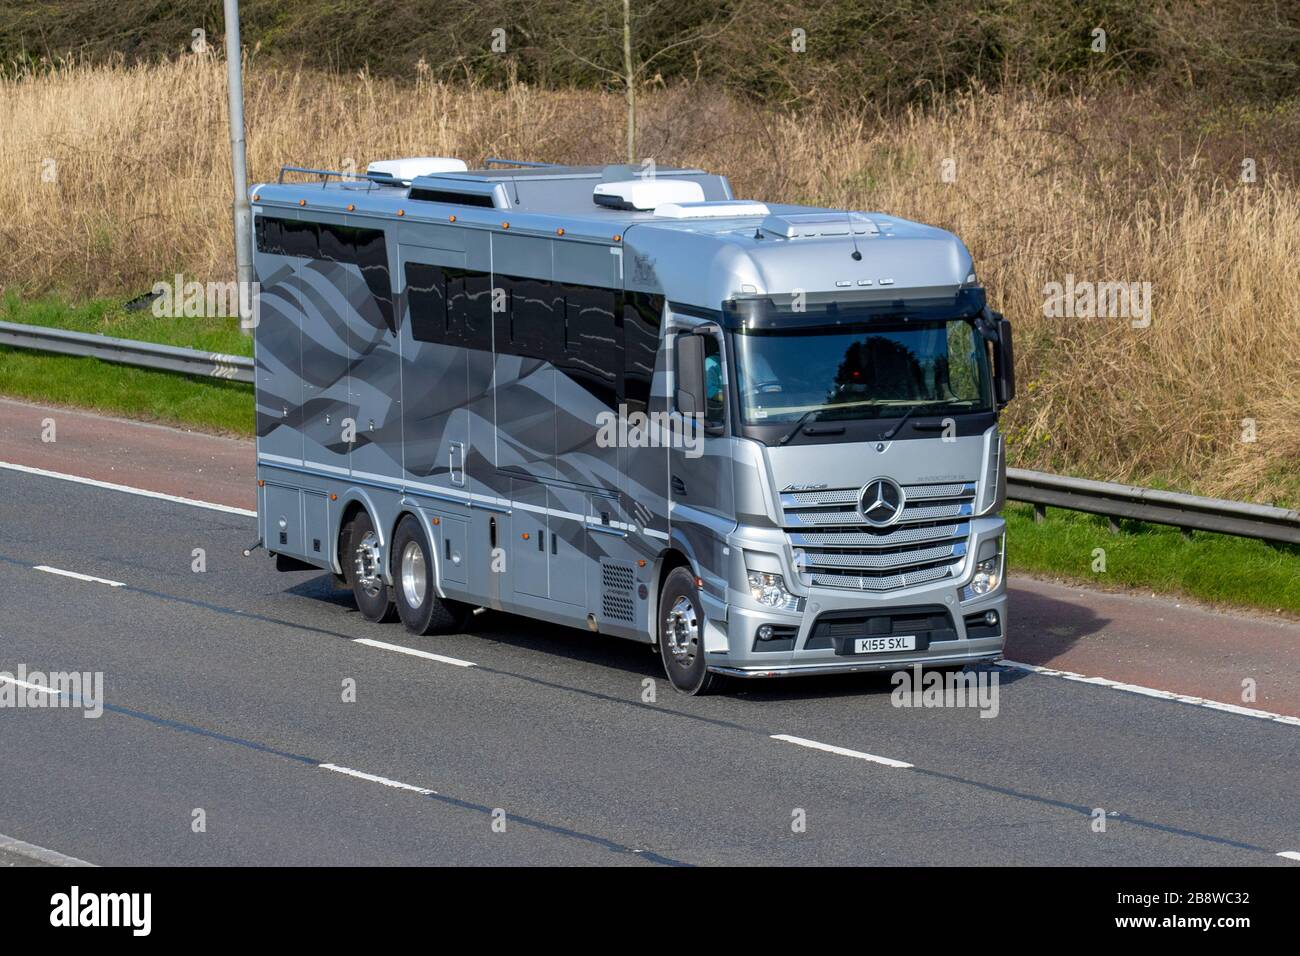 Mercedes Benz Actros Jm Interceptor SXL Touring Caravans and Motorhomes,  campervans, RV leisure vehicle, family holidays, vacations, caravan  holiday, life on the road M6 motorway, Manchester, UK Stock Photo - Alamy